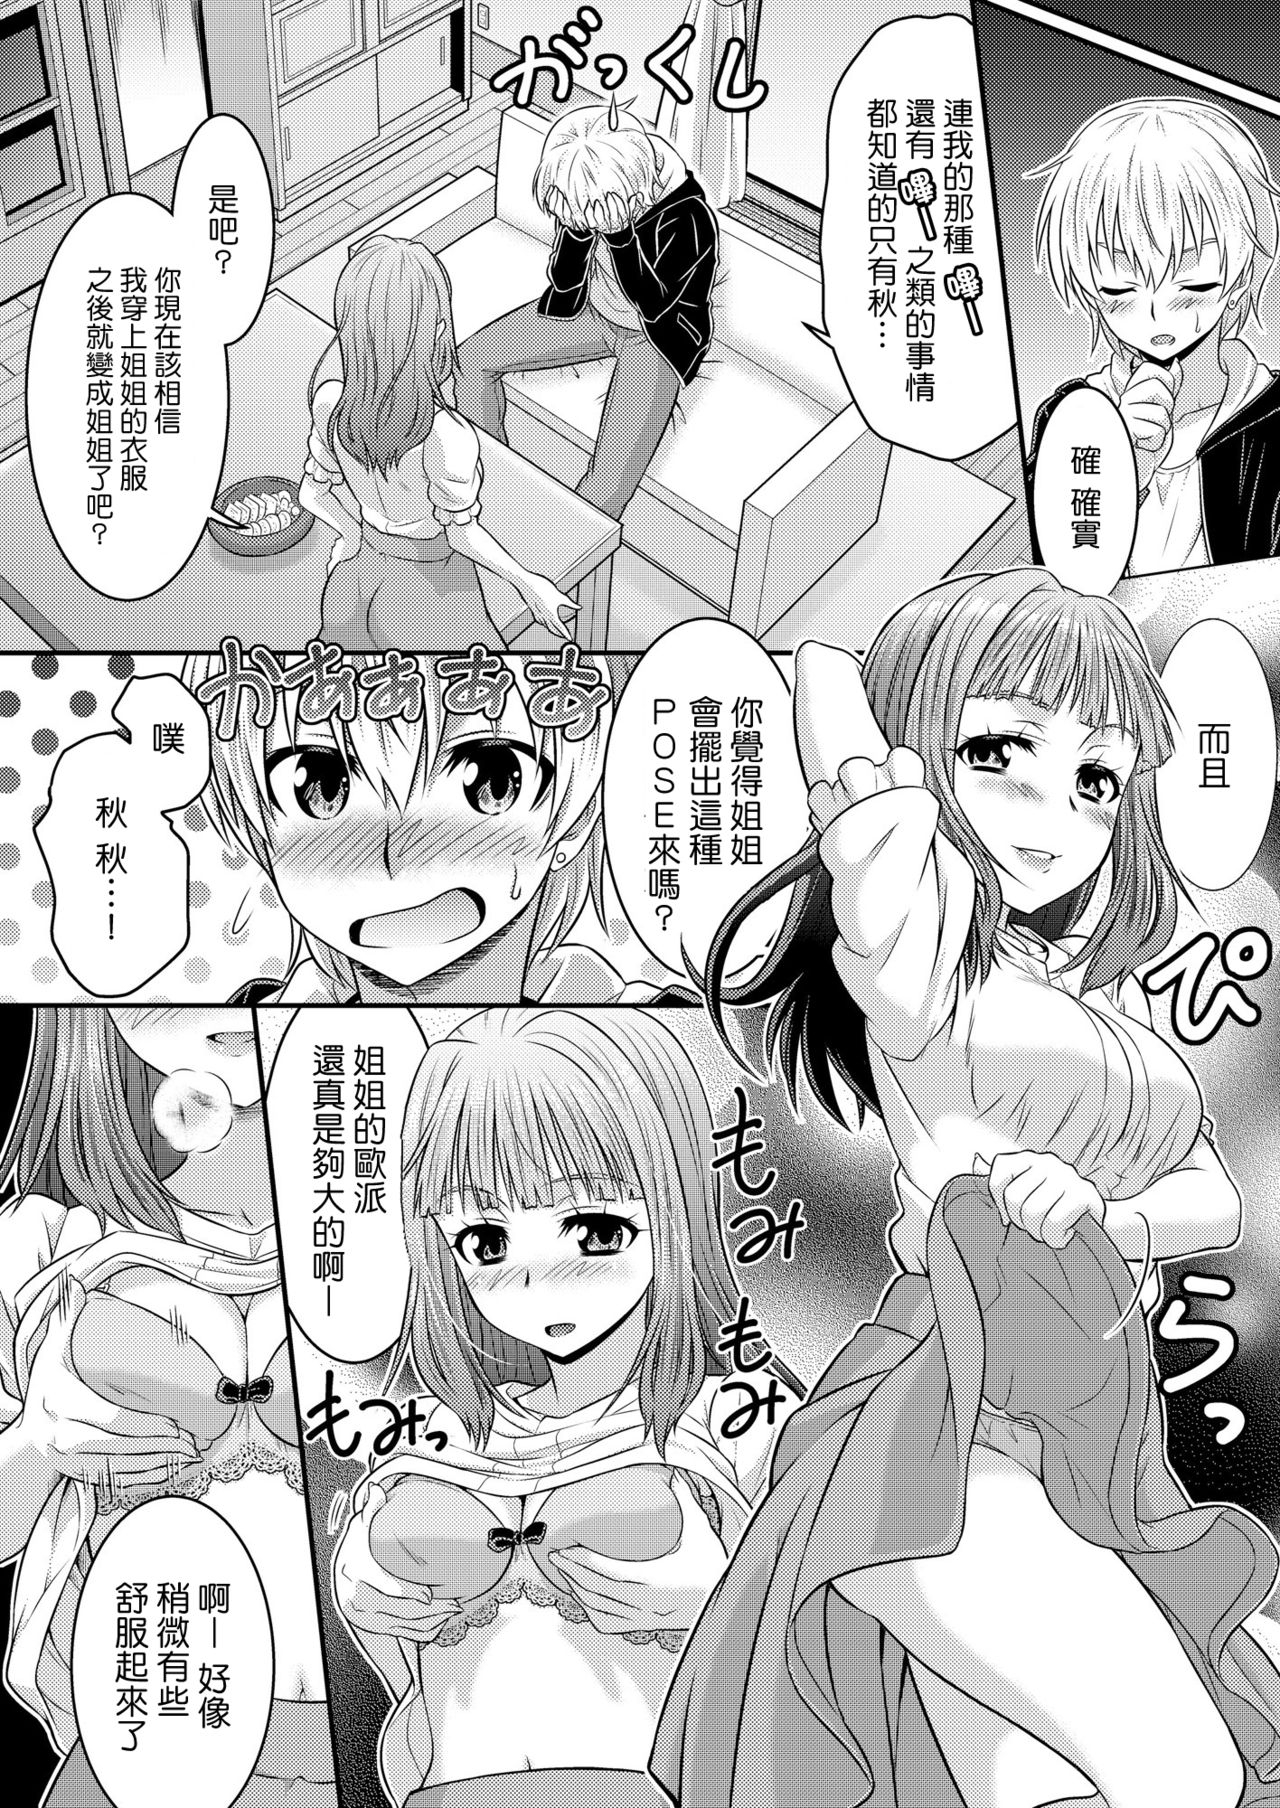 Metamorph ★ Coordination - I Become Whatever Girl I Crossdress As~ [Sister Arc, Classmate Arc] [Chinese] [瑞树汉化组] page 13 full